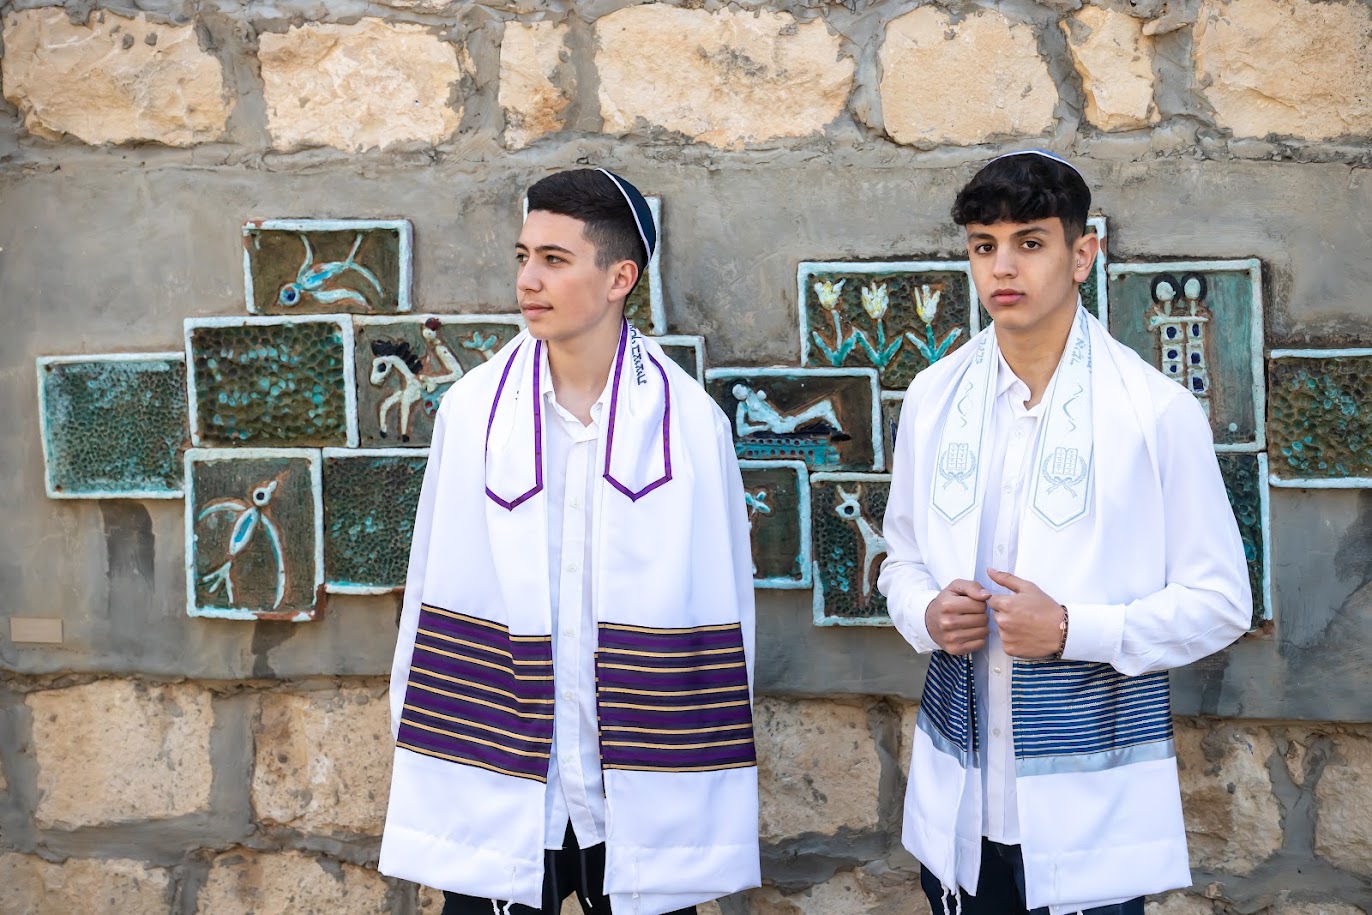 Tallit Whether it is Bar Mitzvah, Bat Mitzvah or maybe a Jewish wedding, find the best collection of hand-made tallit that brings Judaism to life from the online shop of Galilee Silks. For more visit: https://www.galileesilks.com/ by amramrafi